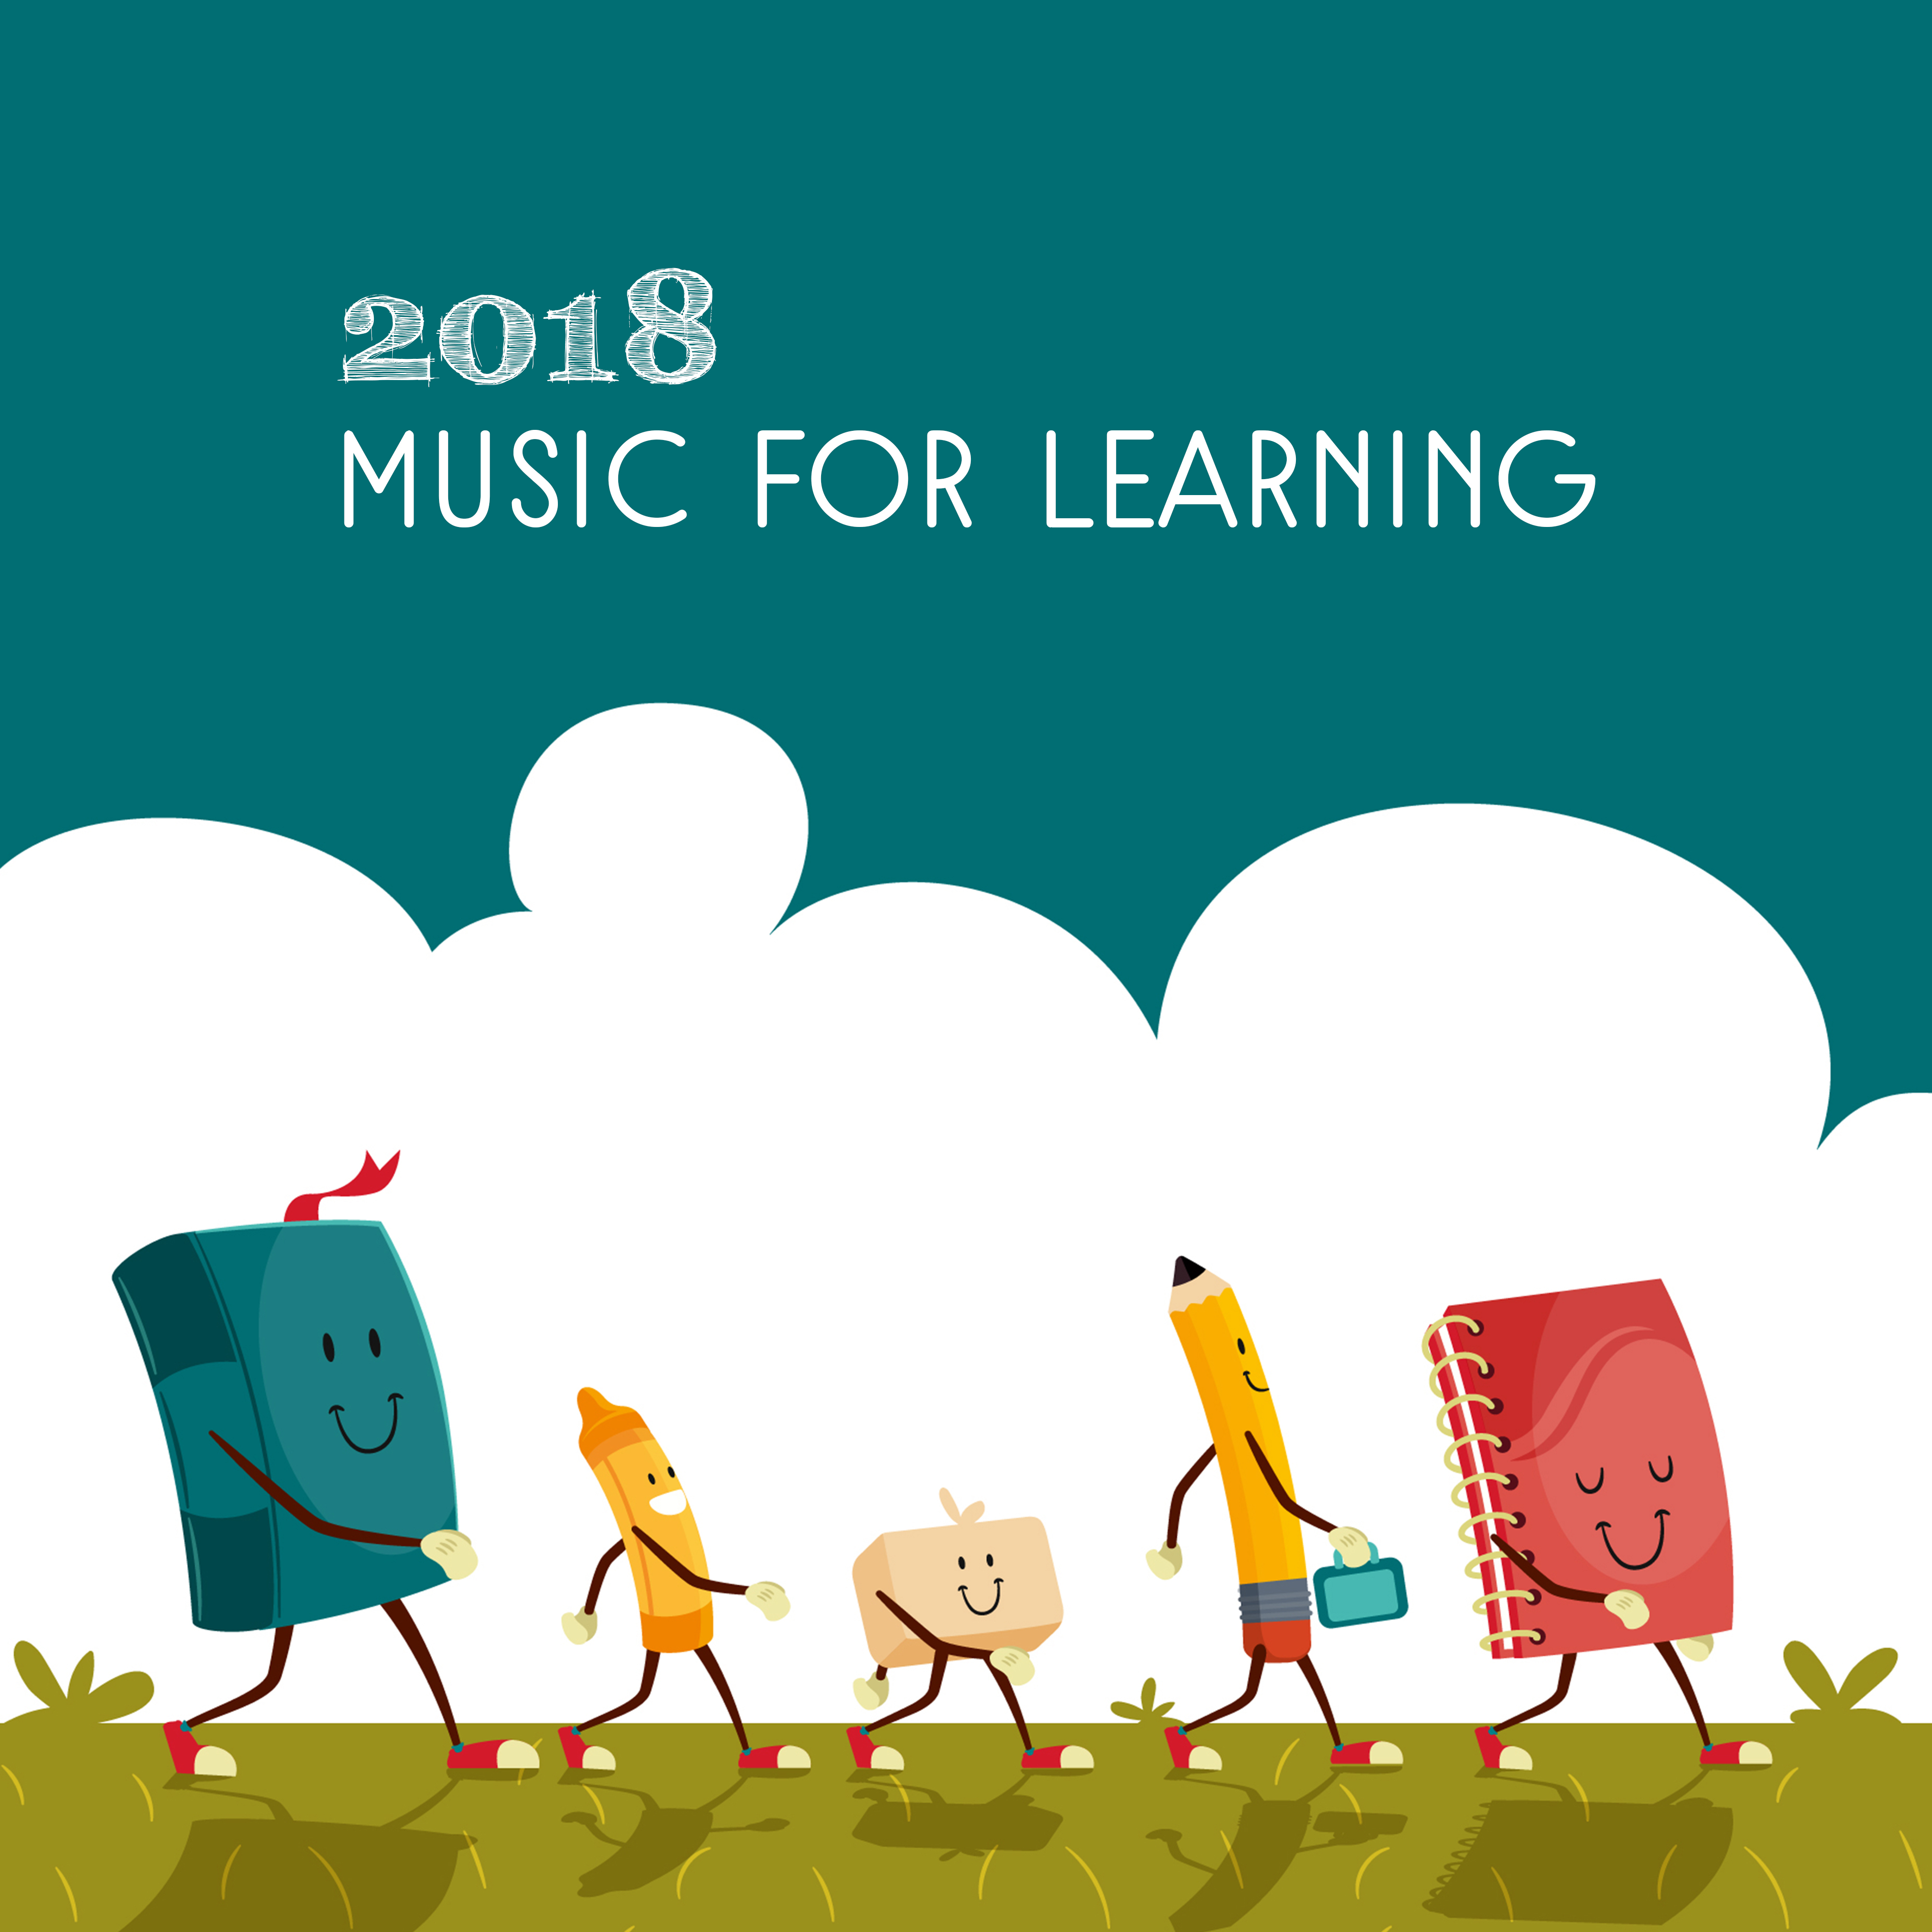 2018 Music for Learning